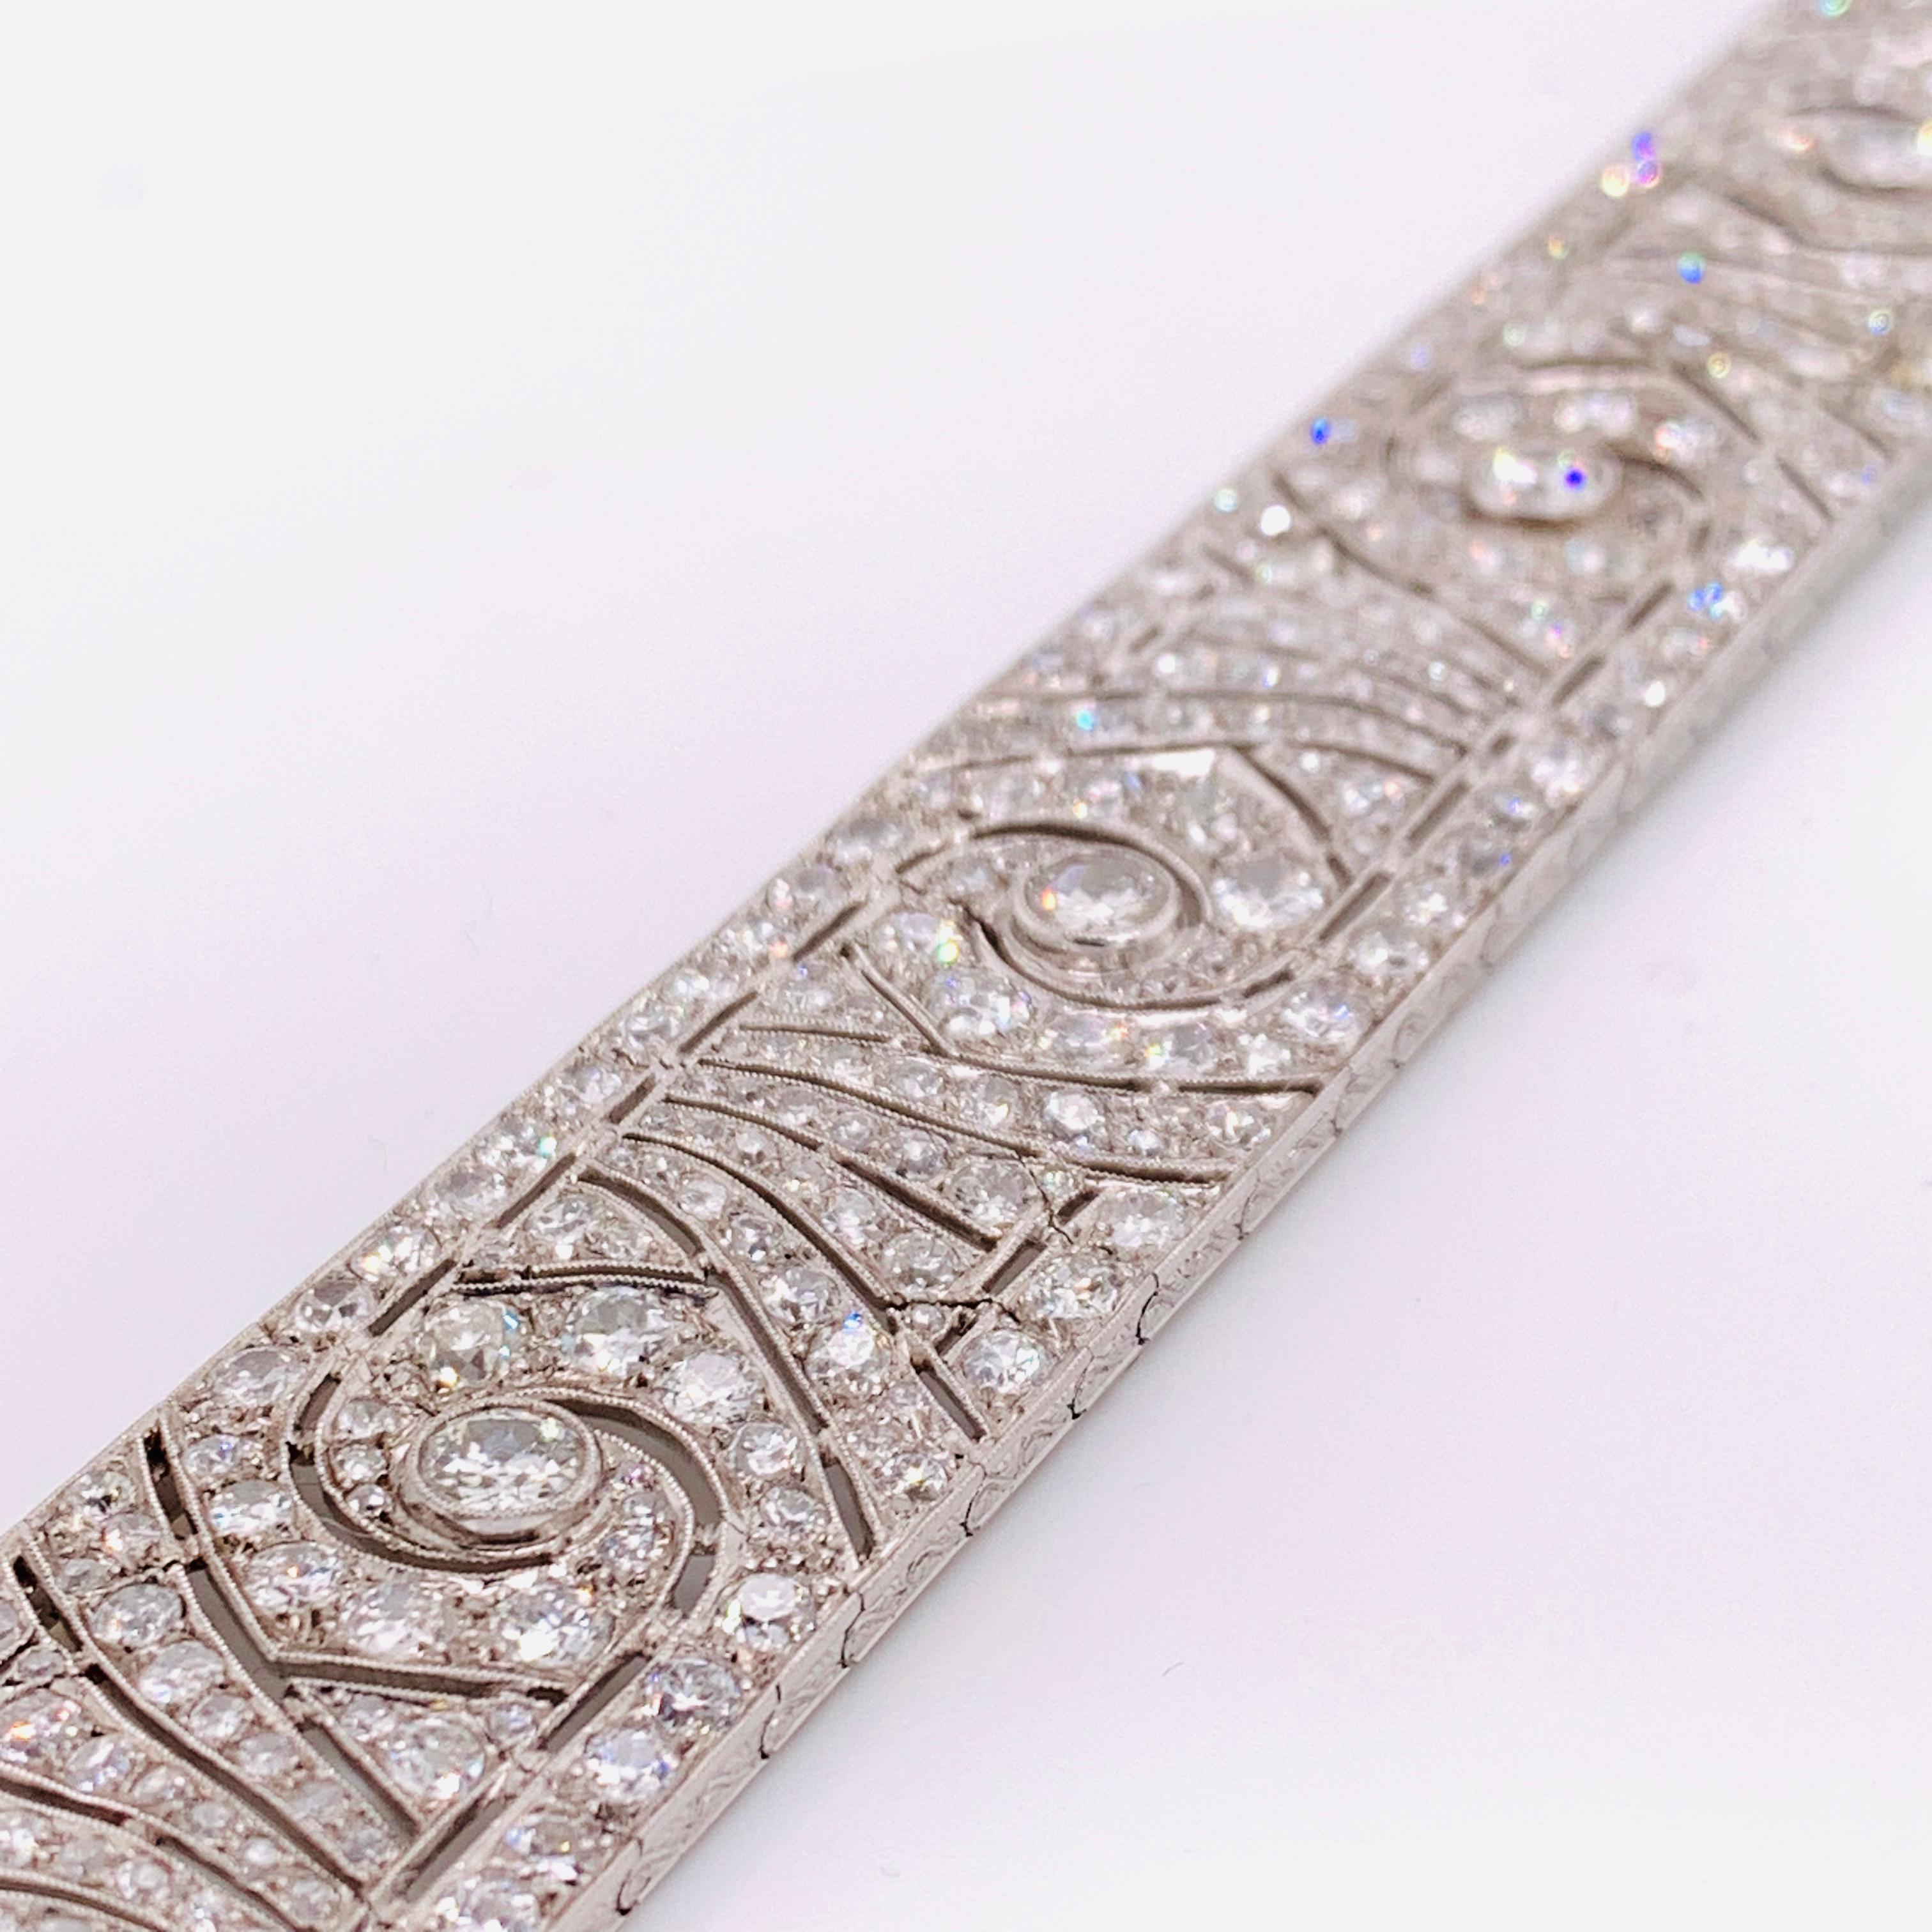 A magnificent French Art Deco diamond bracelet, set with approximately 20.00ct of old-cut diamonds. The sides are engraved with a foliate and scroll design, mounted in platinum. Circa 1930.